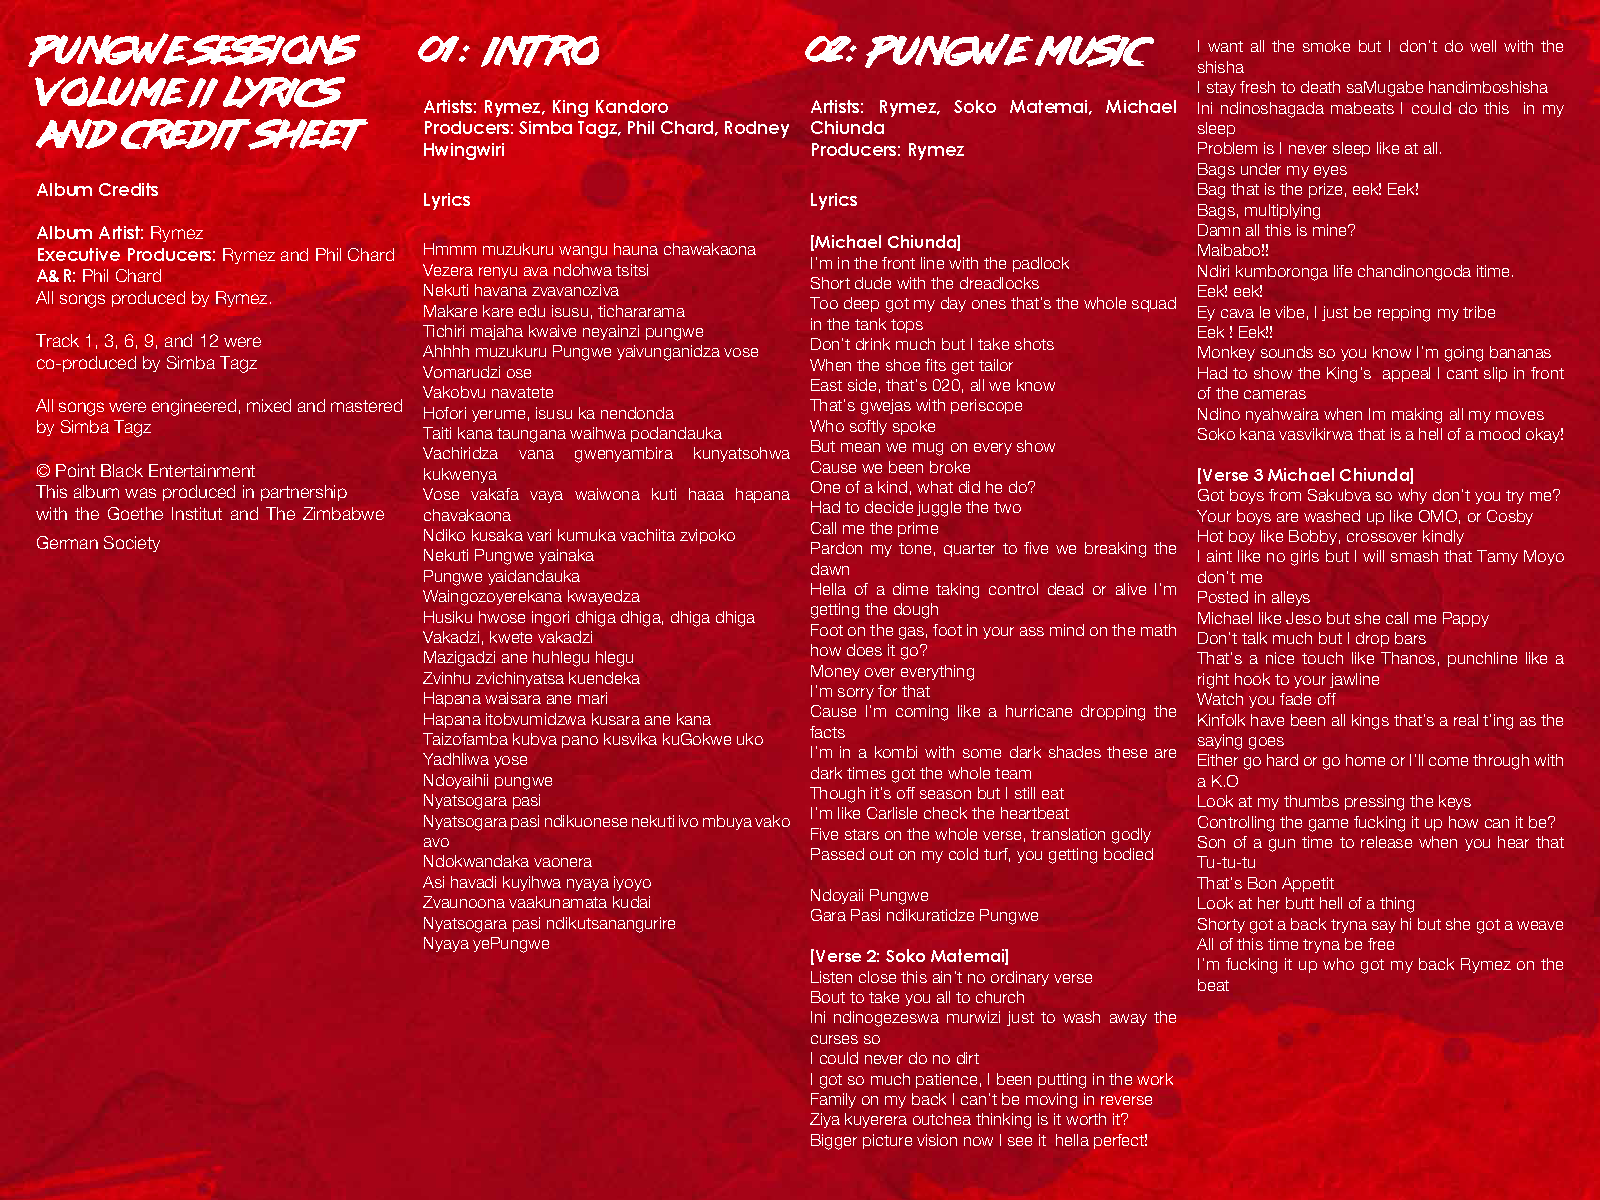 Pungwe Sessions Vol II Booklet_Page_2.png